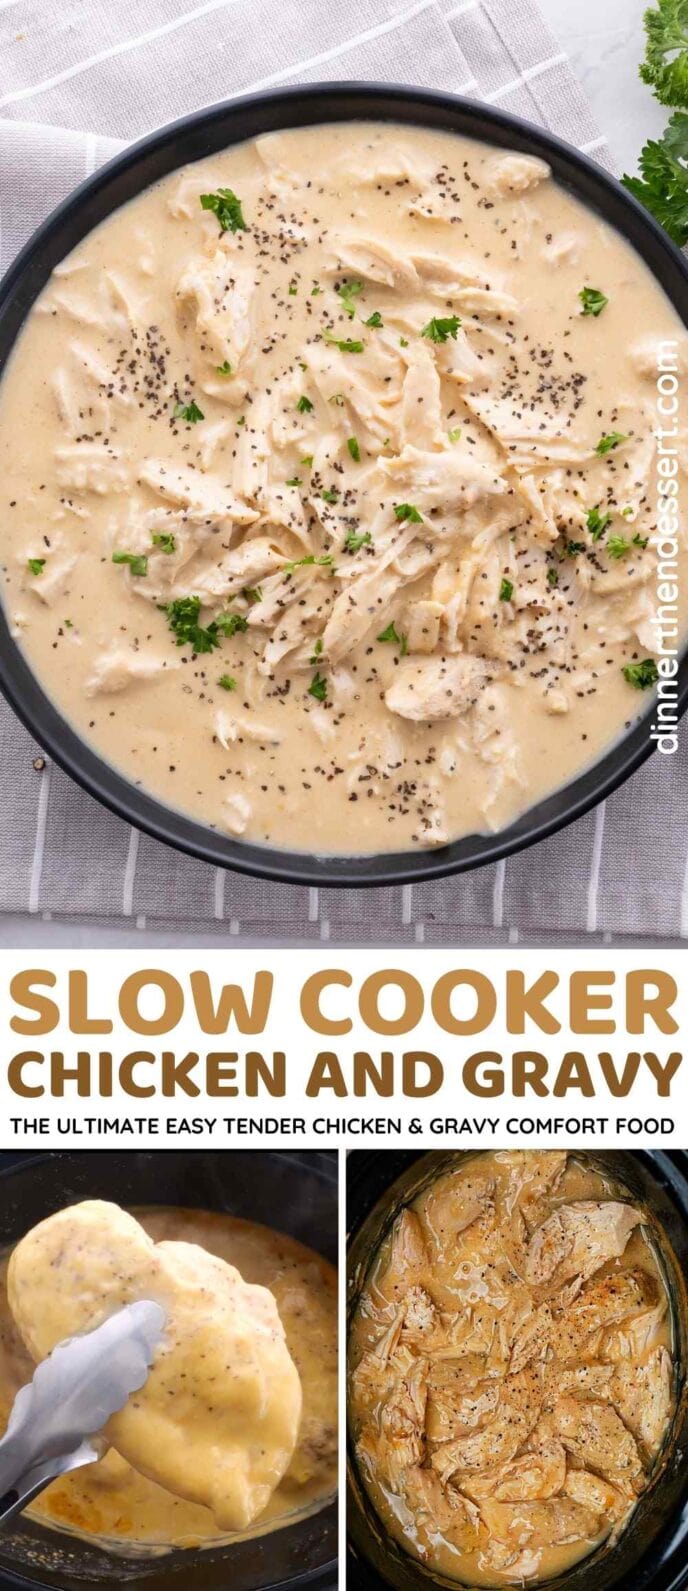 Slow Cooker Chicken and Gravy Collage